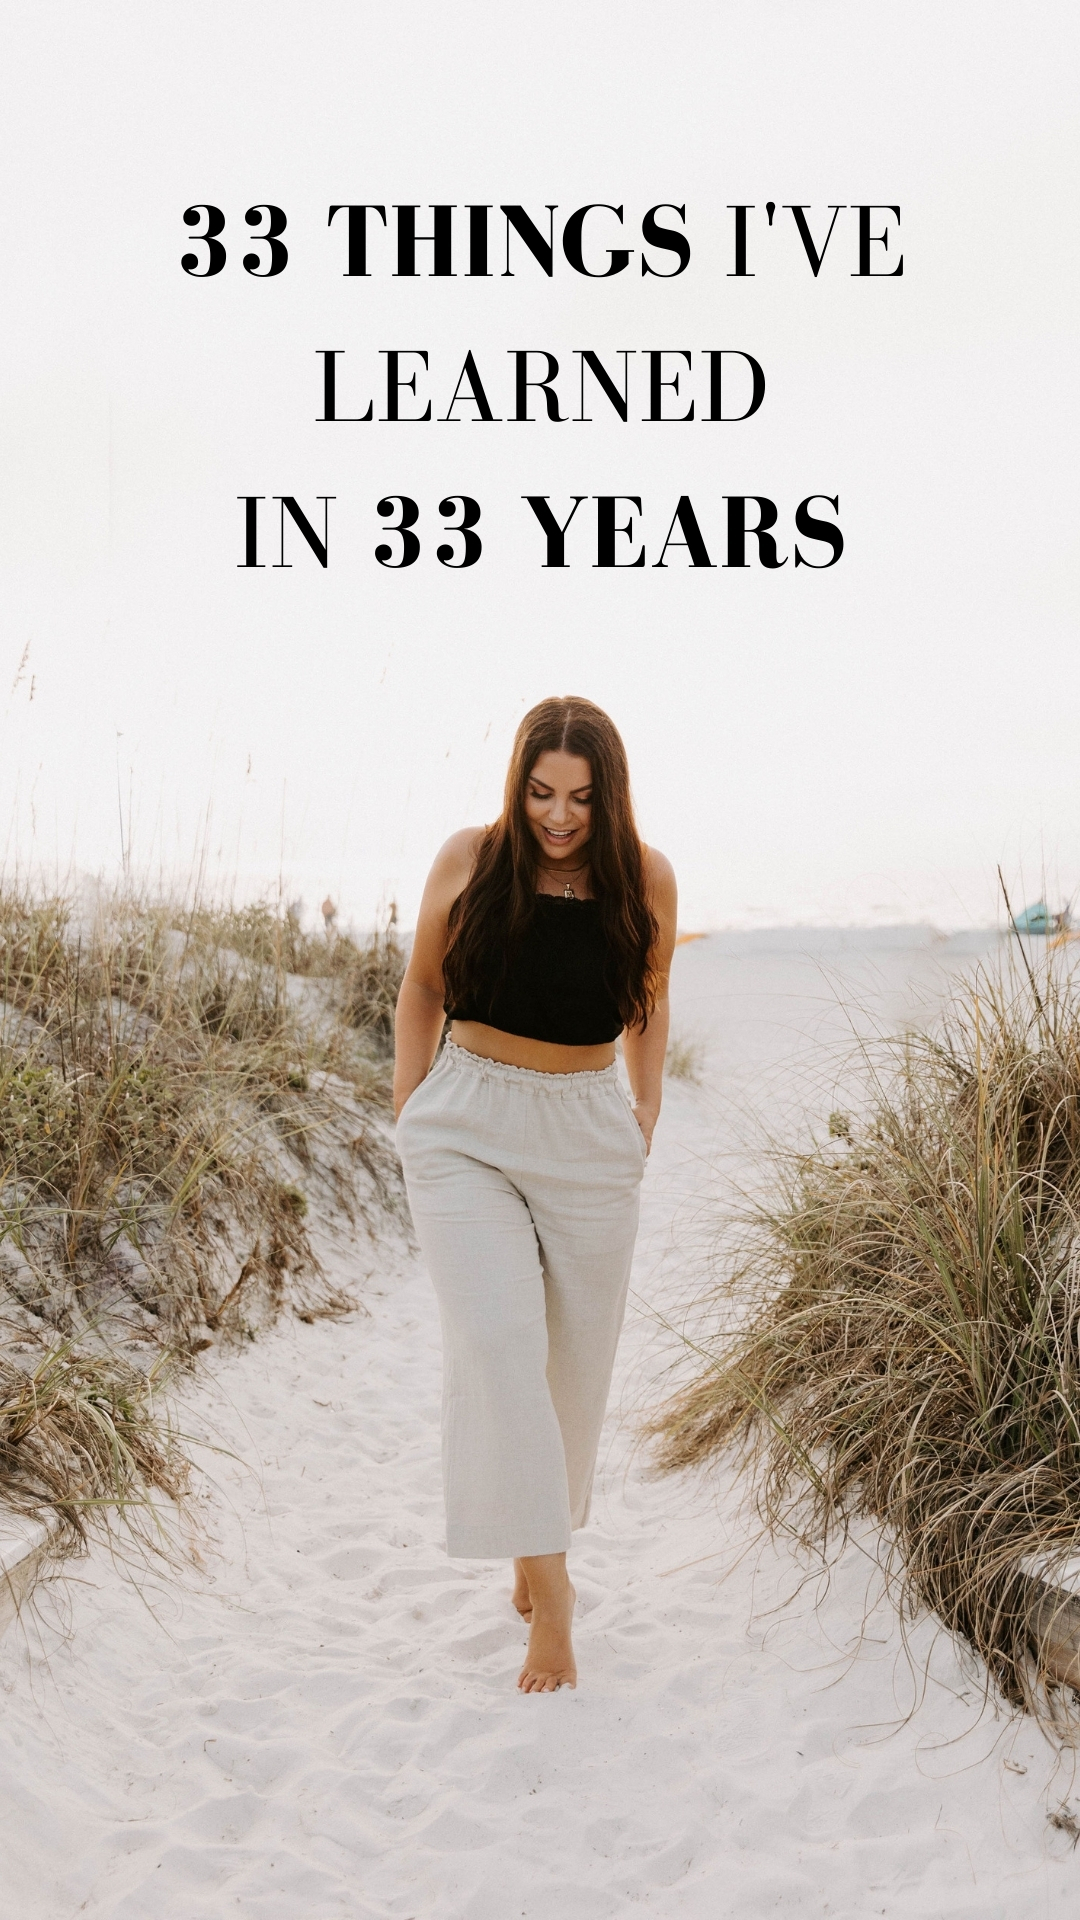 33 Things I've Learned In 33 Years